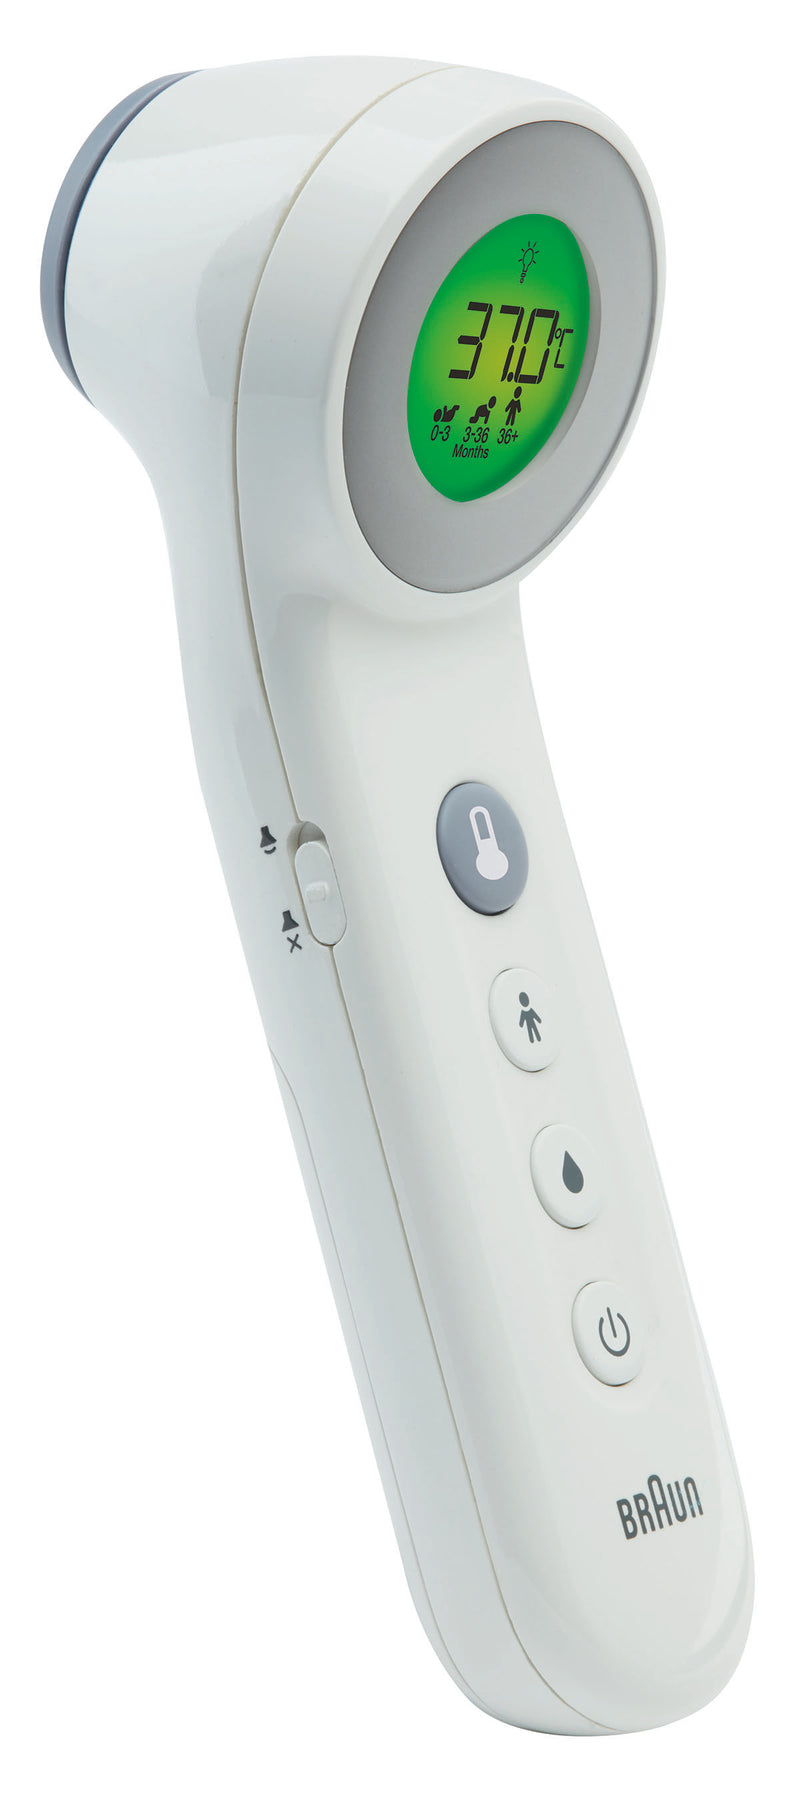 BRAUN BNT400 Forehead Thermometer